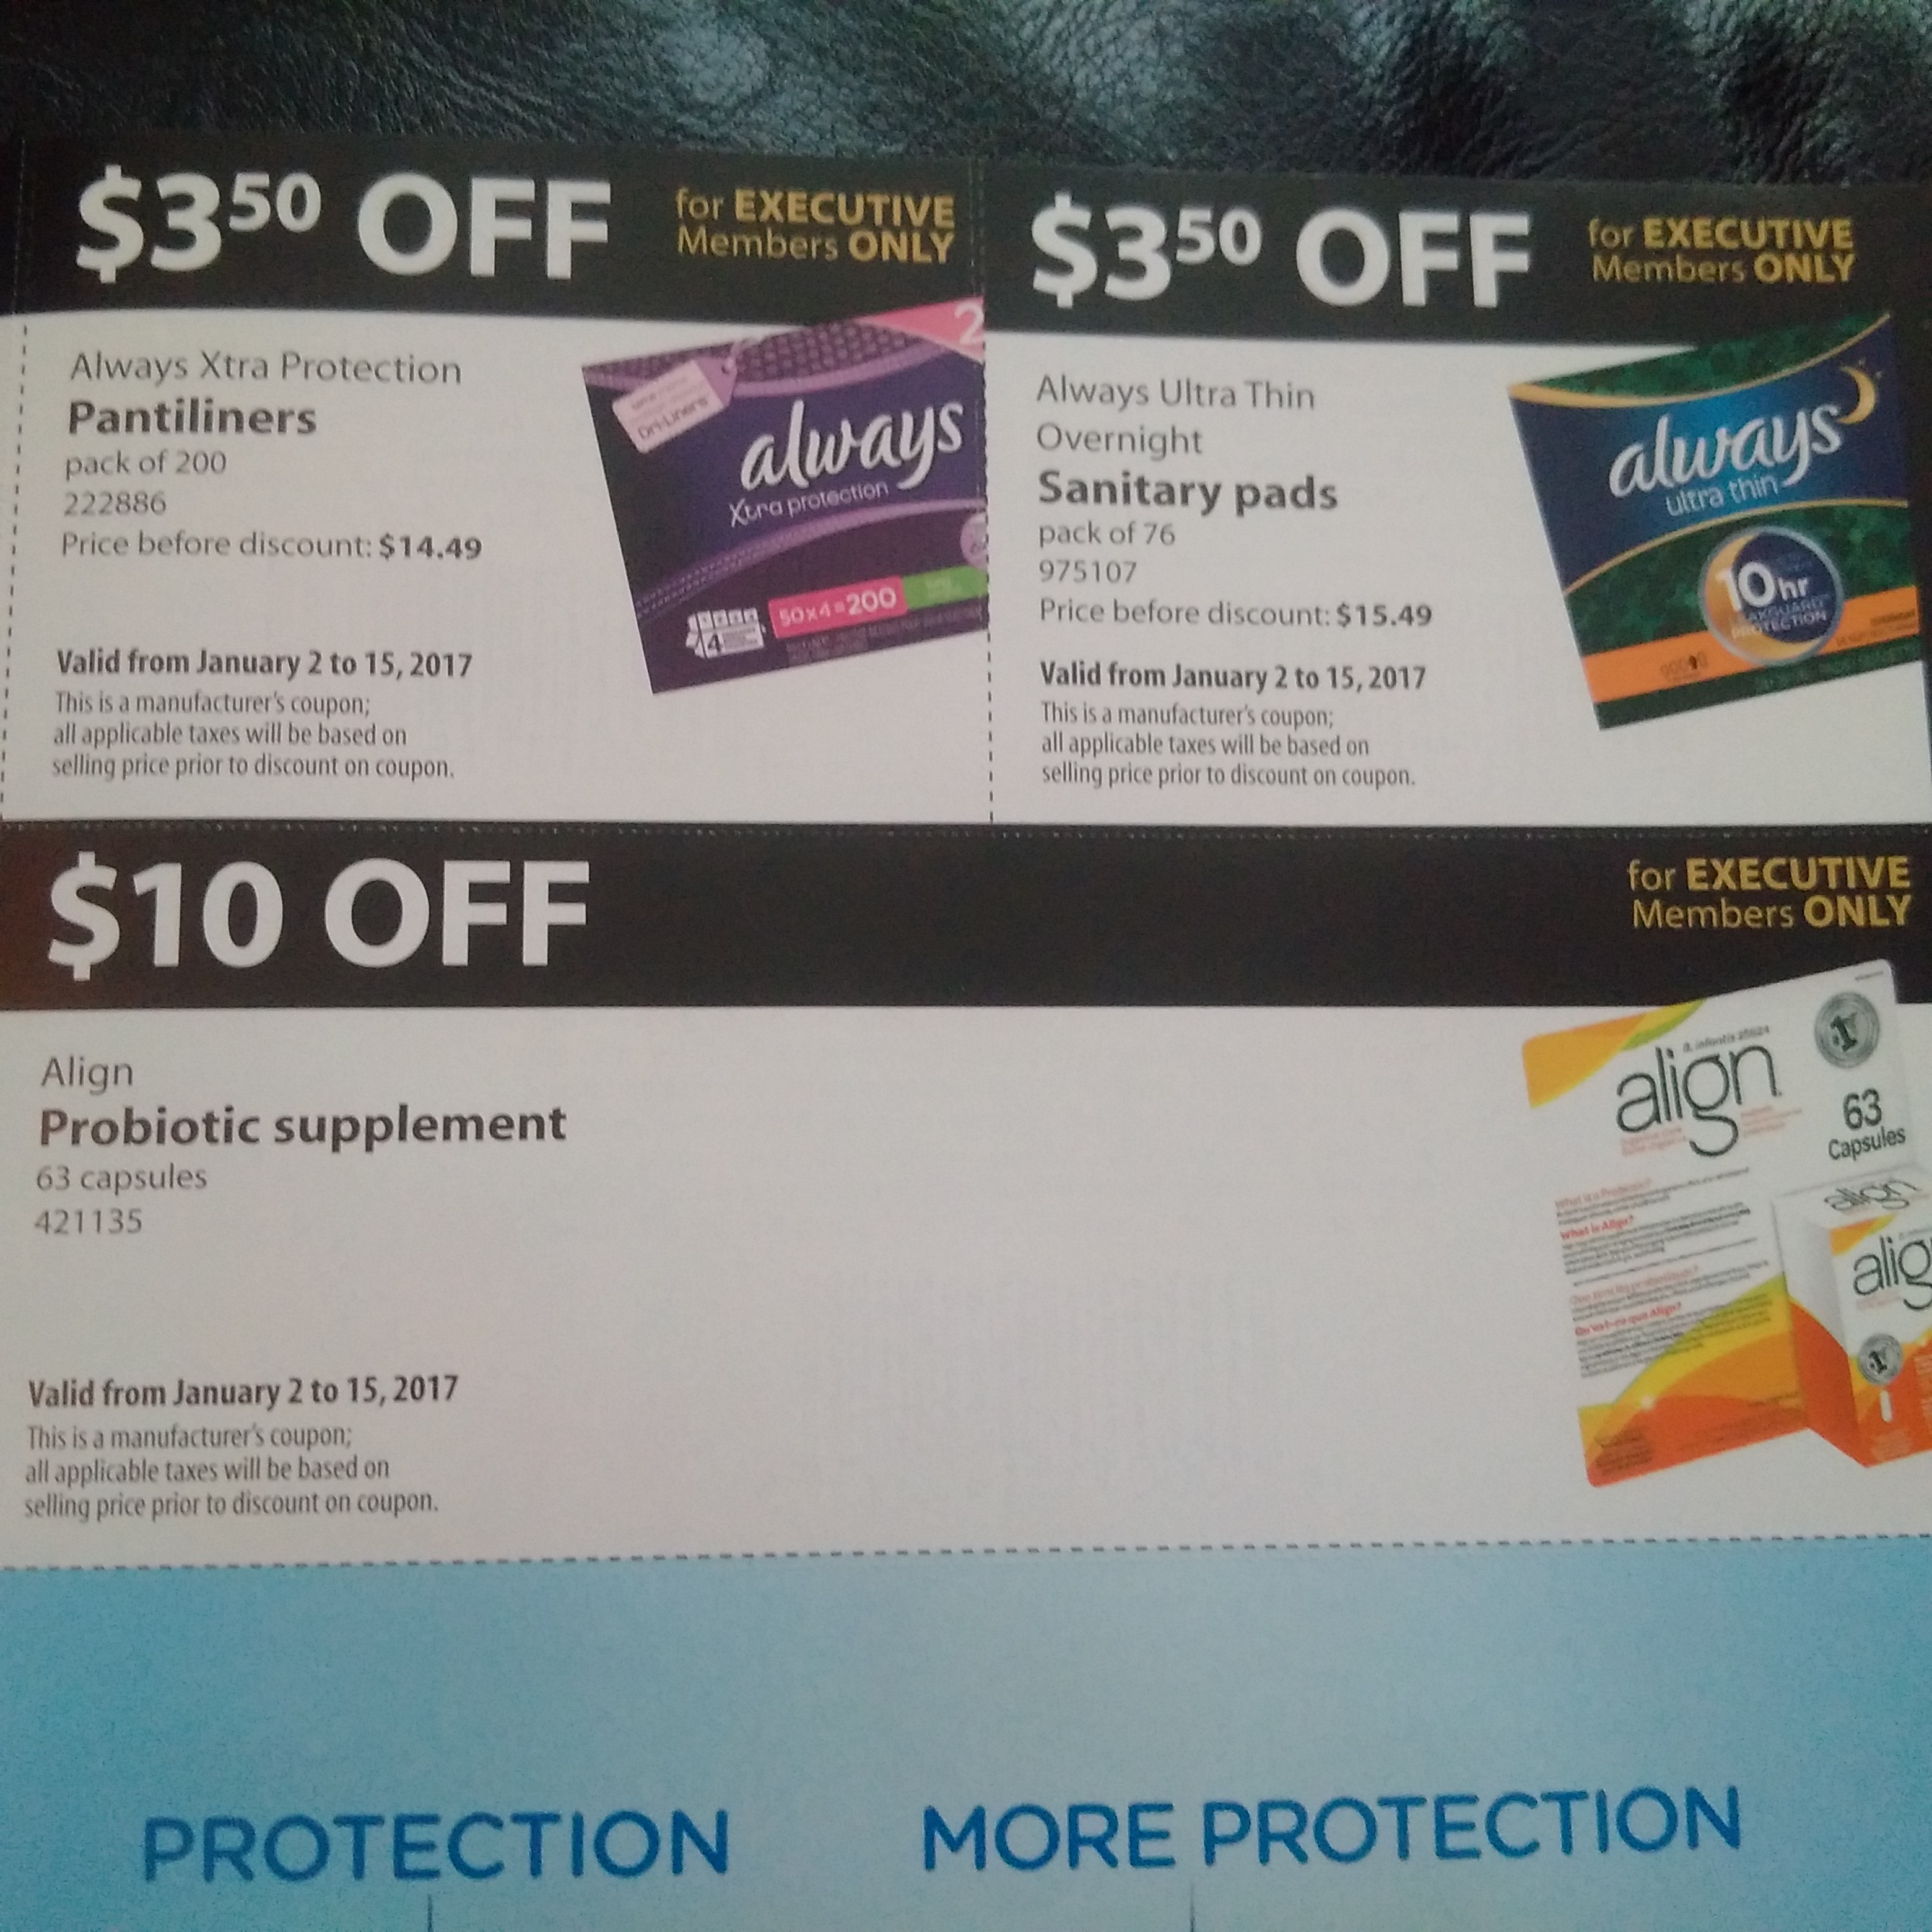 costco-executive-coupons-for-january-2017-save-money-in-winnipeg